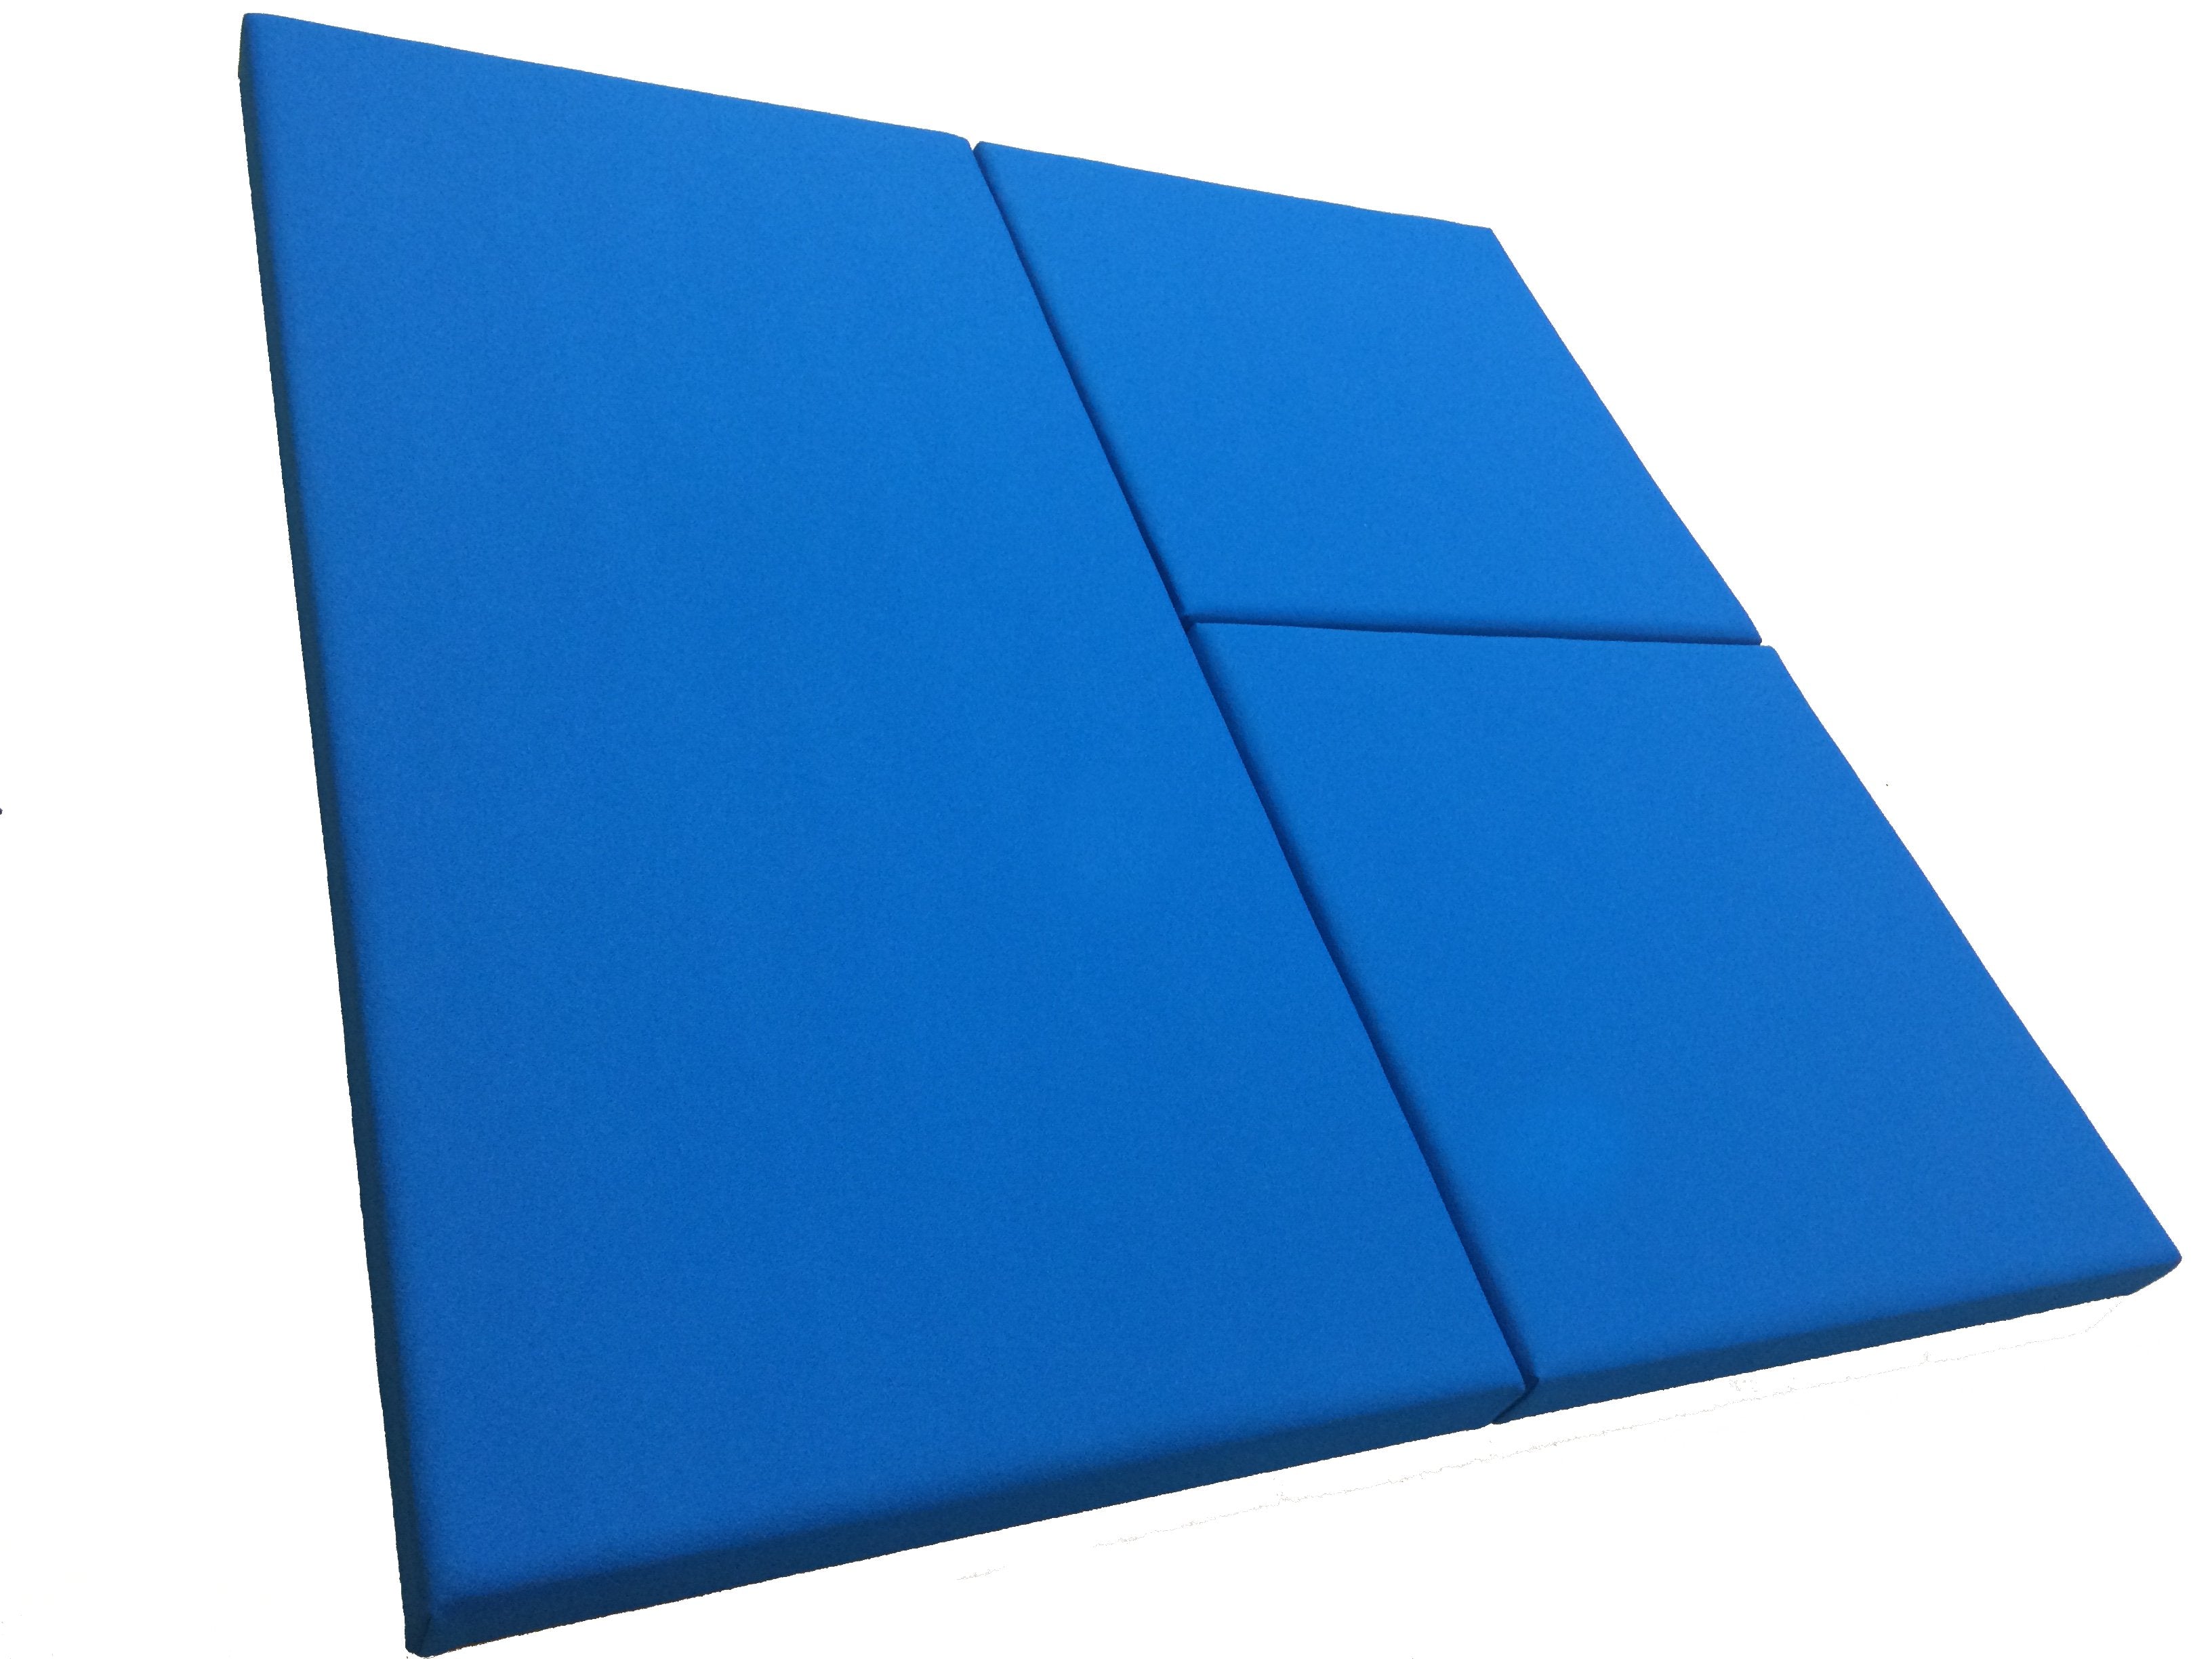 1" SoundControl Ceiling Mounted Acoustic Panel 2ft by 2ft - Advanced Acoustics